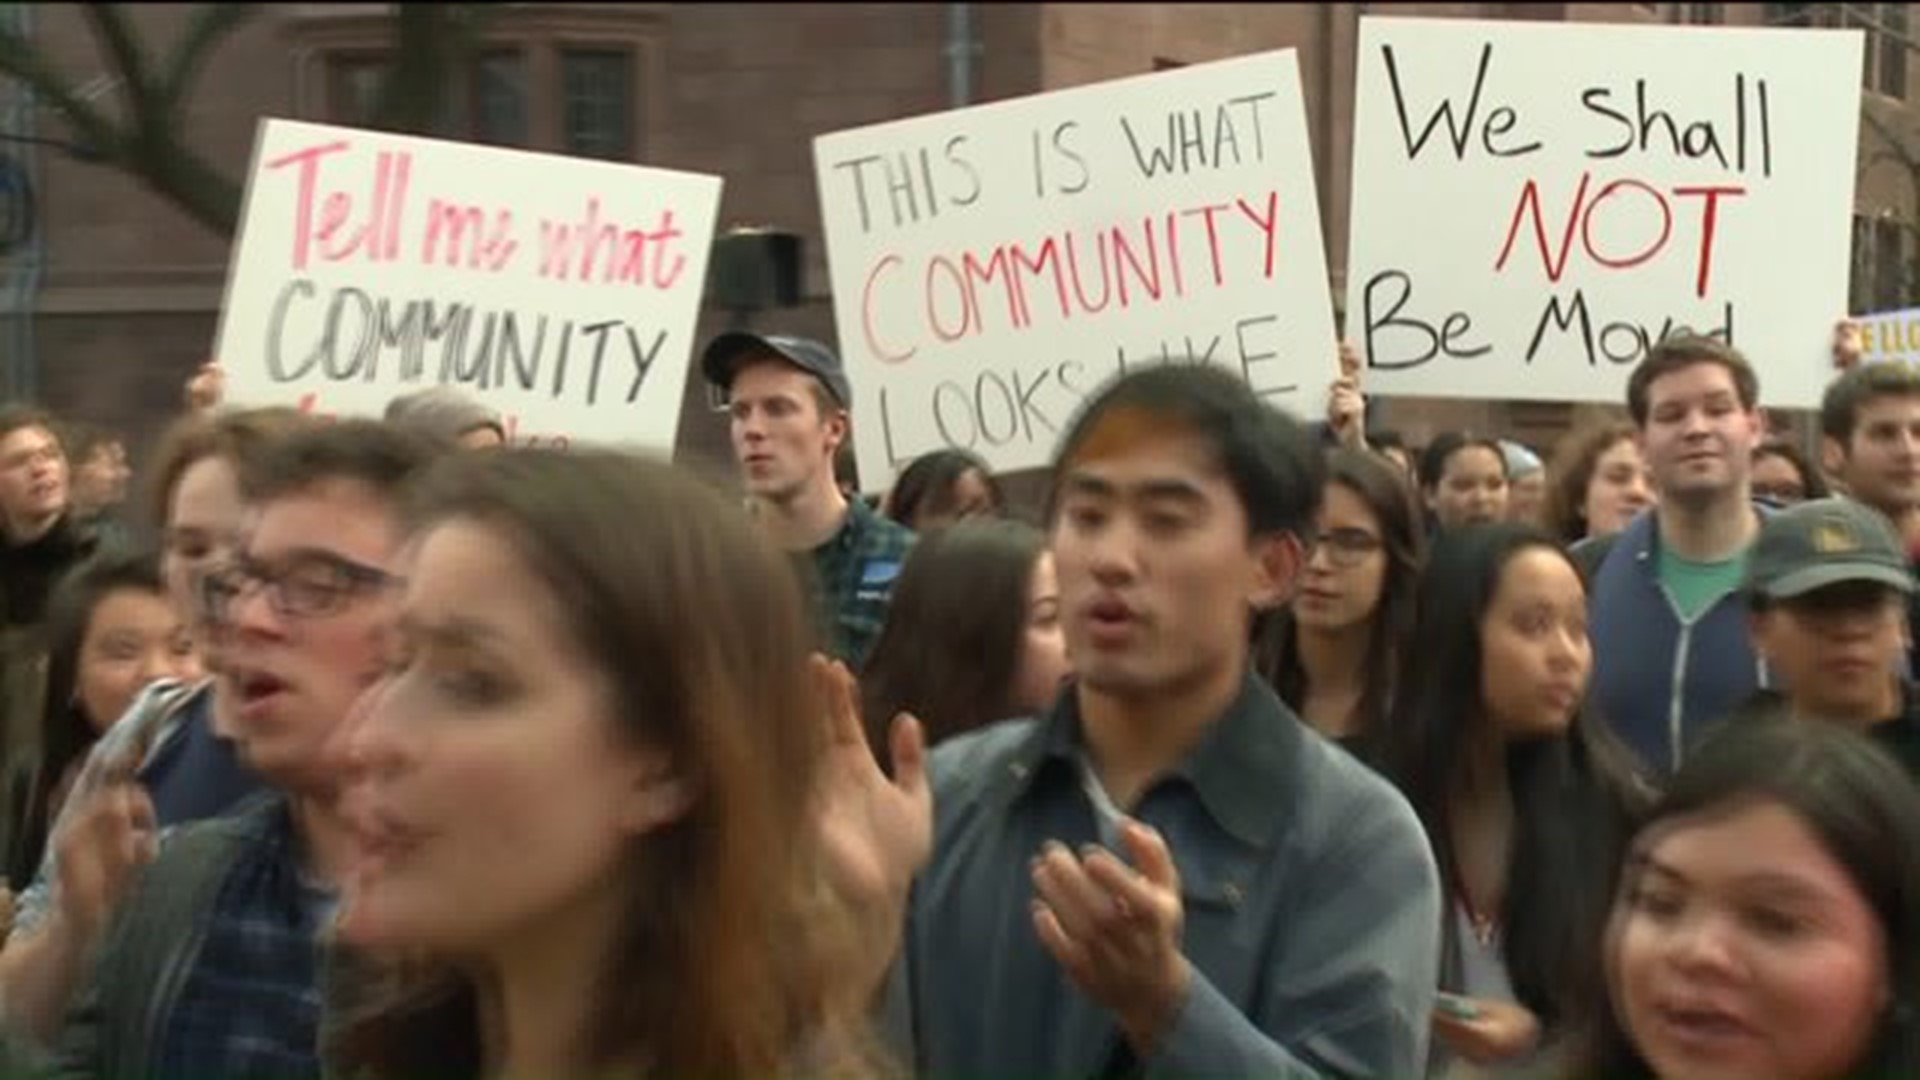 Interview: Race relations on college campuses